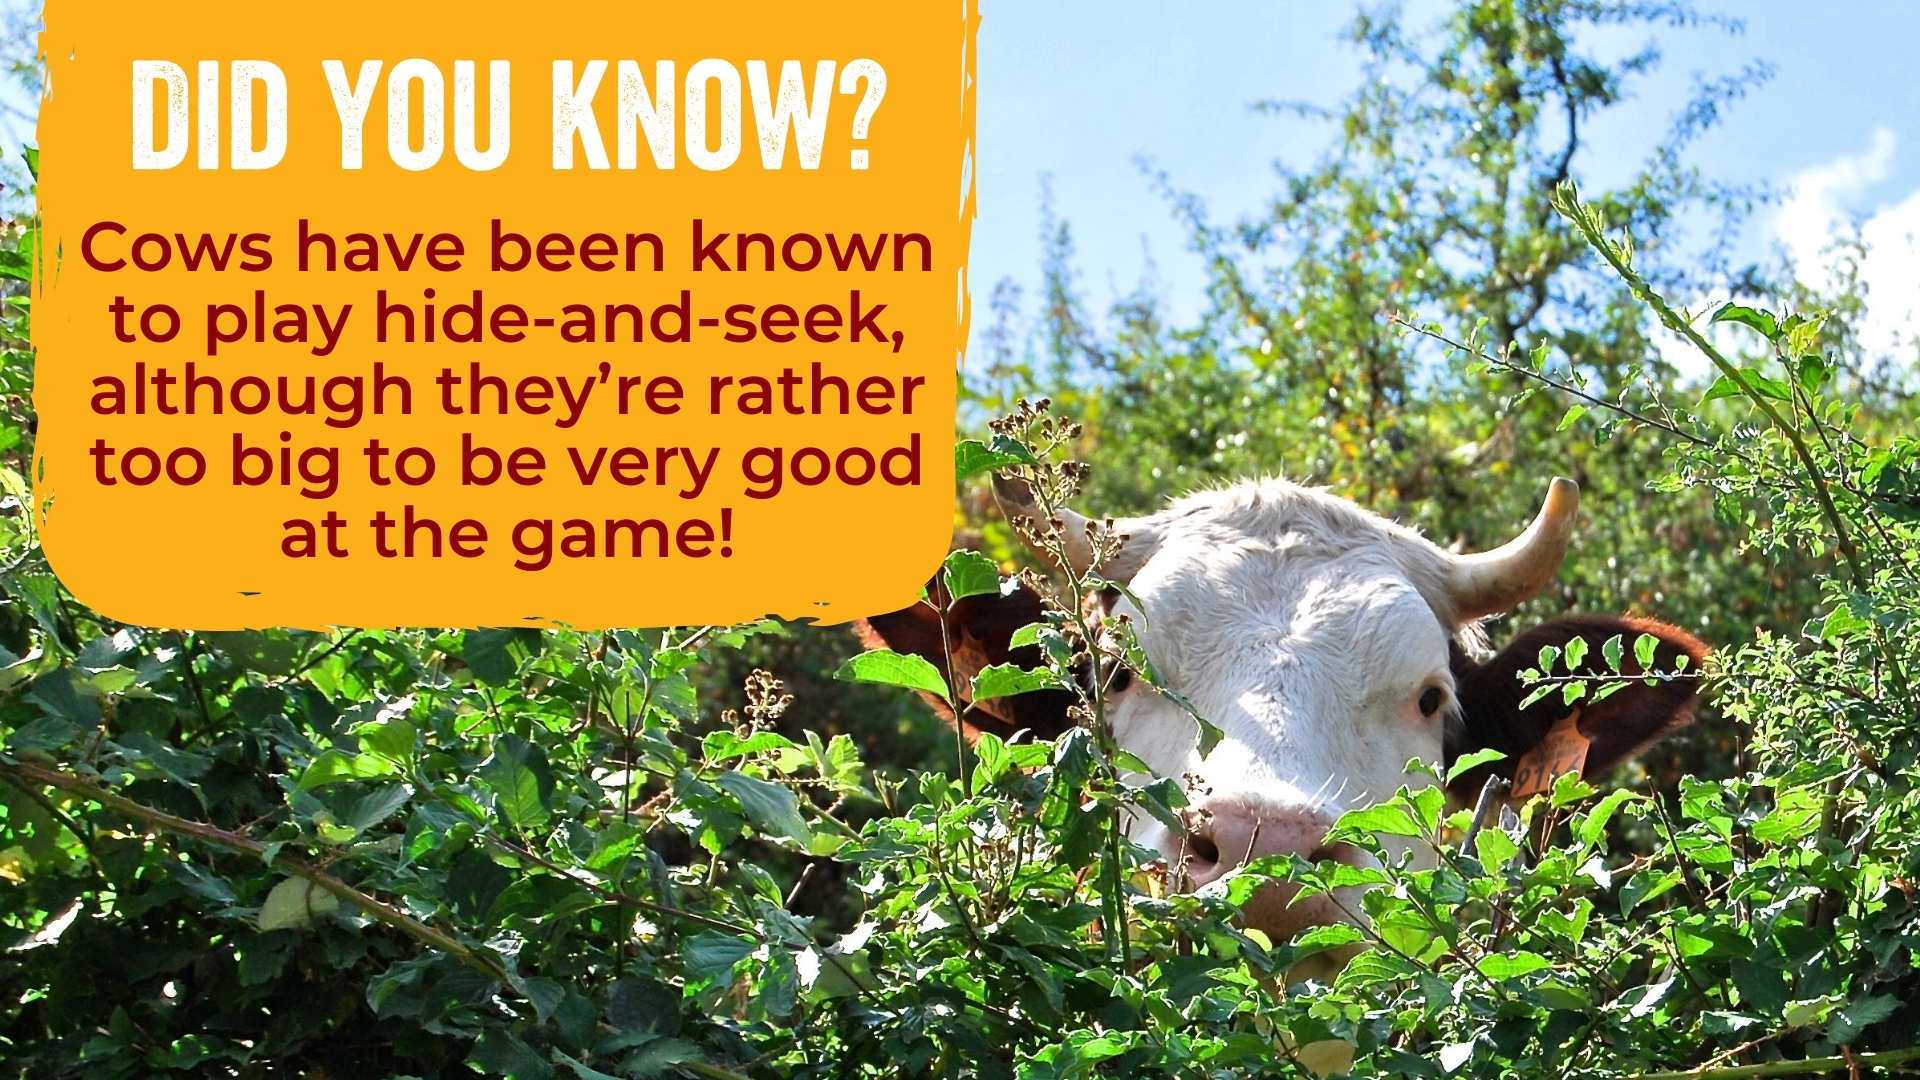 Cows have been known to play hide-and-seek, although they’re rather too big to be very good at the game!